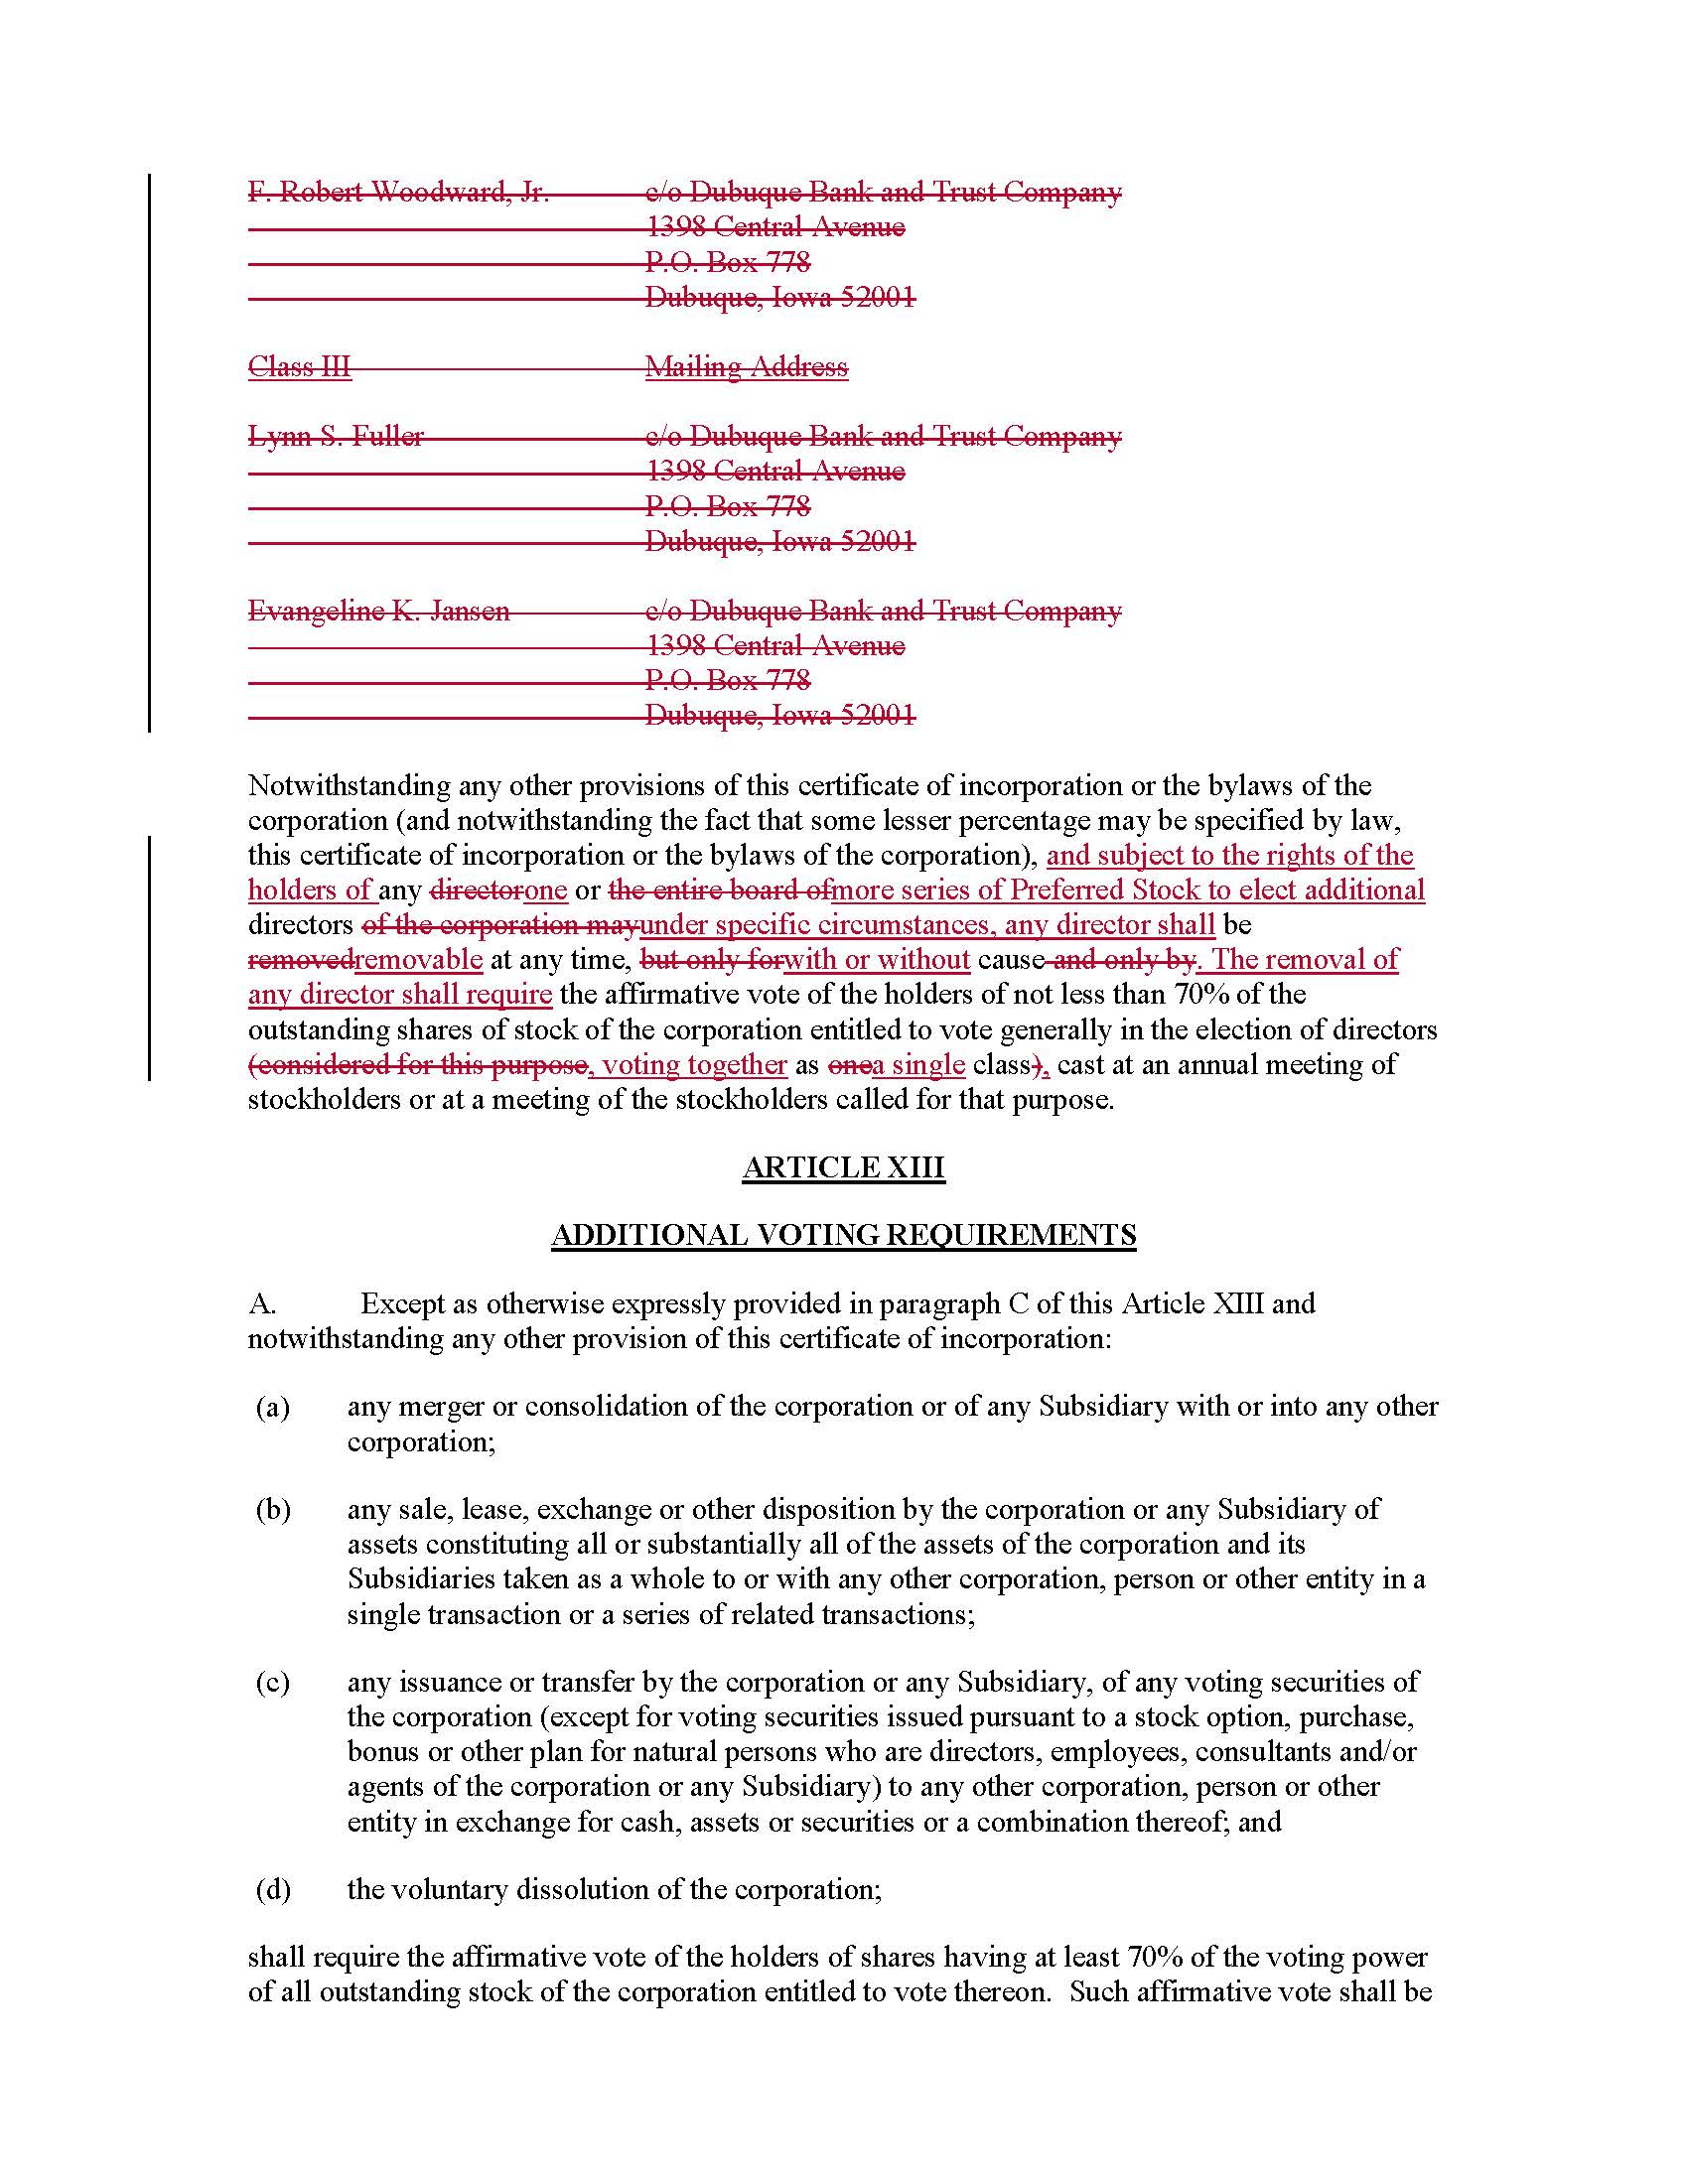 Amended and Restated Certificate of Incorporation (Redline) v.2_Page_5.jpg